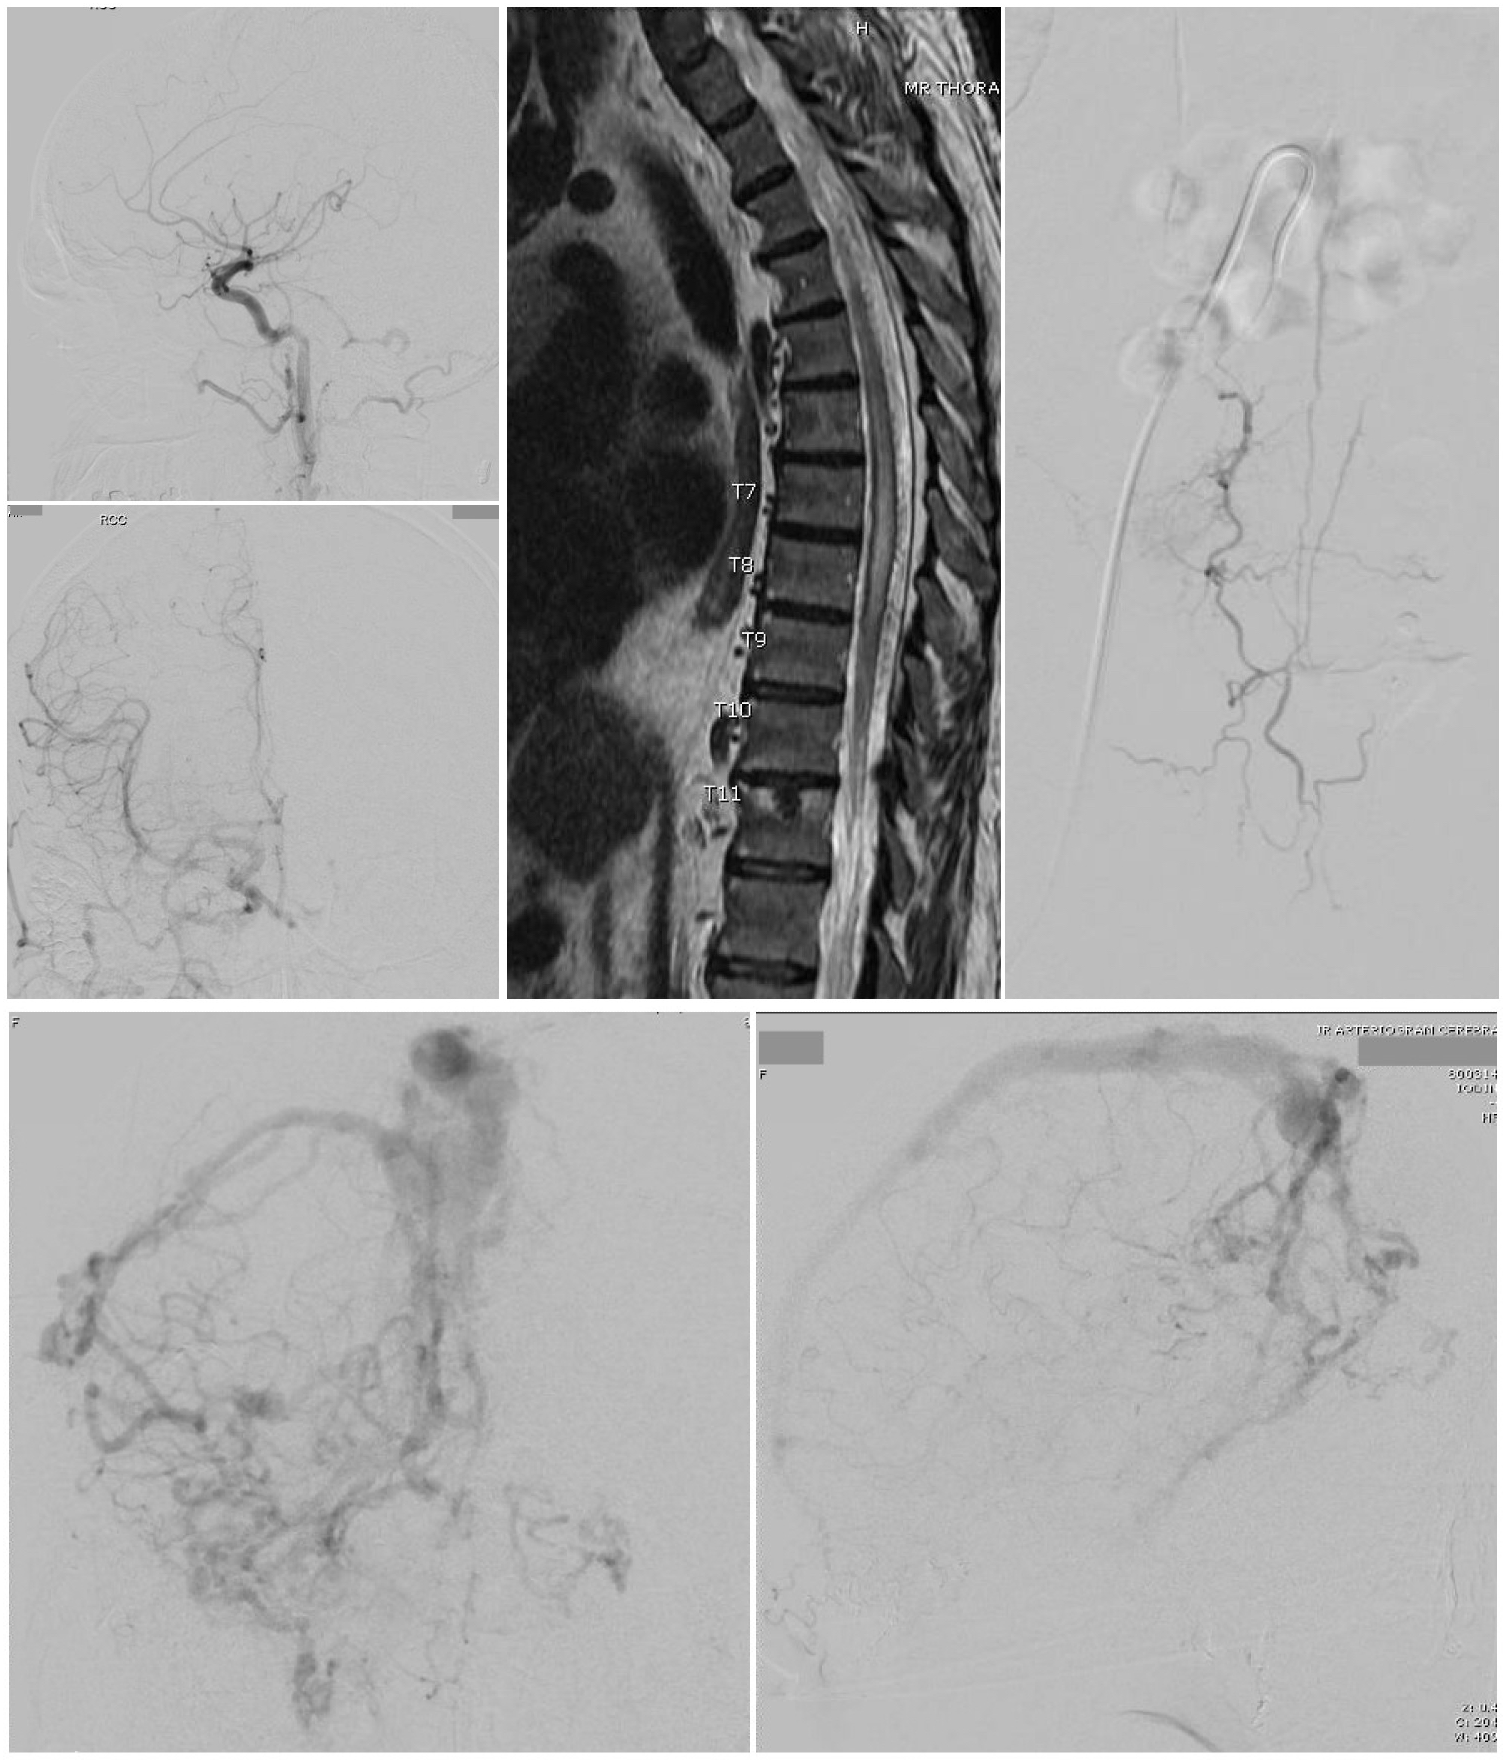 Top Left 2 images - A Cognard type 3 dural arteriovenous fistula is seen on cerebral catheter angiography with arterial phase right common carotid injections, lateral view (top) and anteroposterior view (bottom). 
Bottom 2 Images - A cerebral catheter angiogram with anteroposterior (left) and lateral (right) views, late arterial phase, shows a Cognard type 4 dural arteriovenous fistula with multiple feeding arteries, cerebral and cerebellar draining veins, and venous ectasia of the superior sagittal sinus. 
Left Top 2 Images - A thoracic MRI was obtained in a 60 year old man presenting with symptoms of thoracic myelopathy, which showed cord signal change extending from the T5 level to the conus as well as a serpiginous appearing flow void posterior to the spinal cord concerning for a spinal dural arteriovenous fistula. A catheter angiogram was then performed (right). 